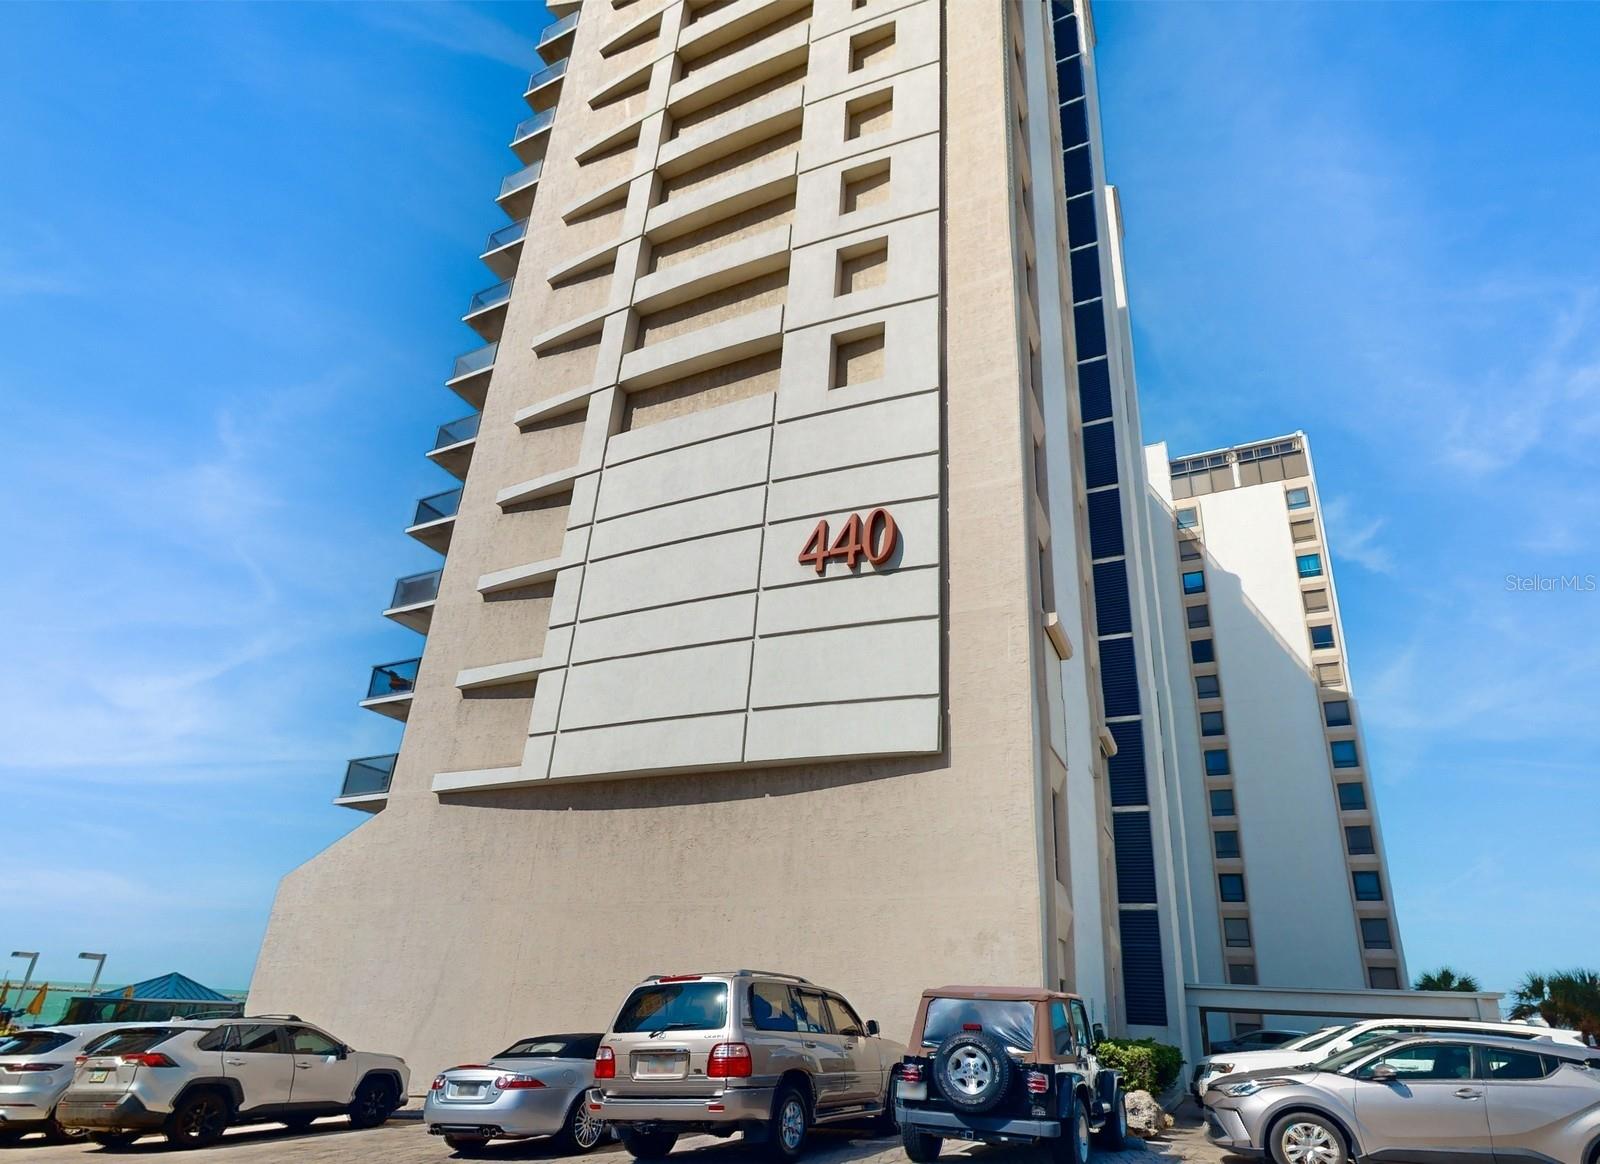 440 West is located on Clearwater Pass, just one hotel south of the Beach Walk Entrance.